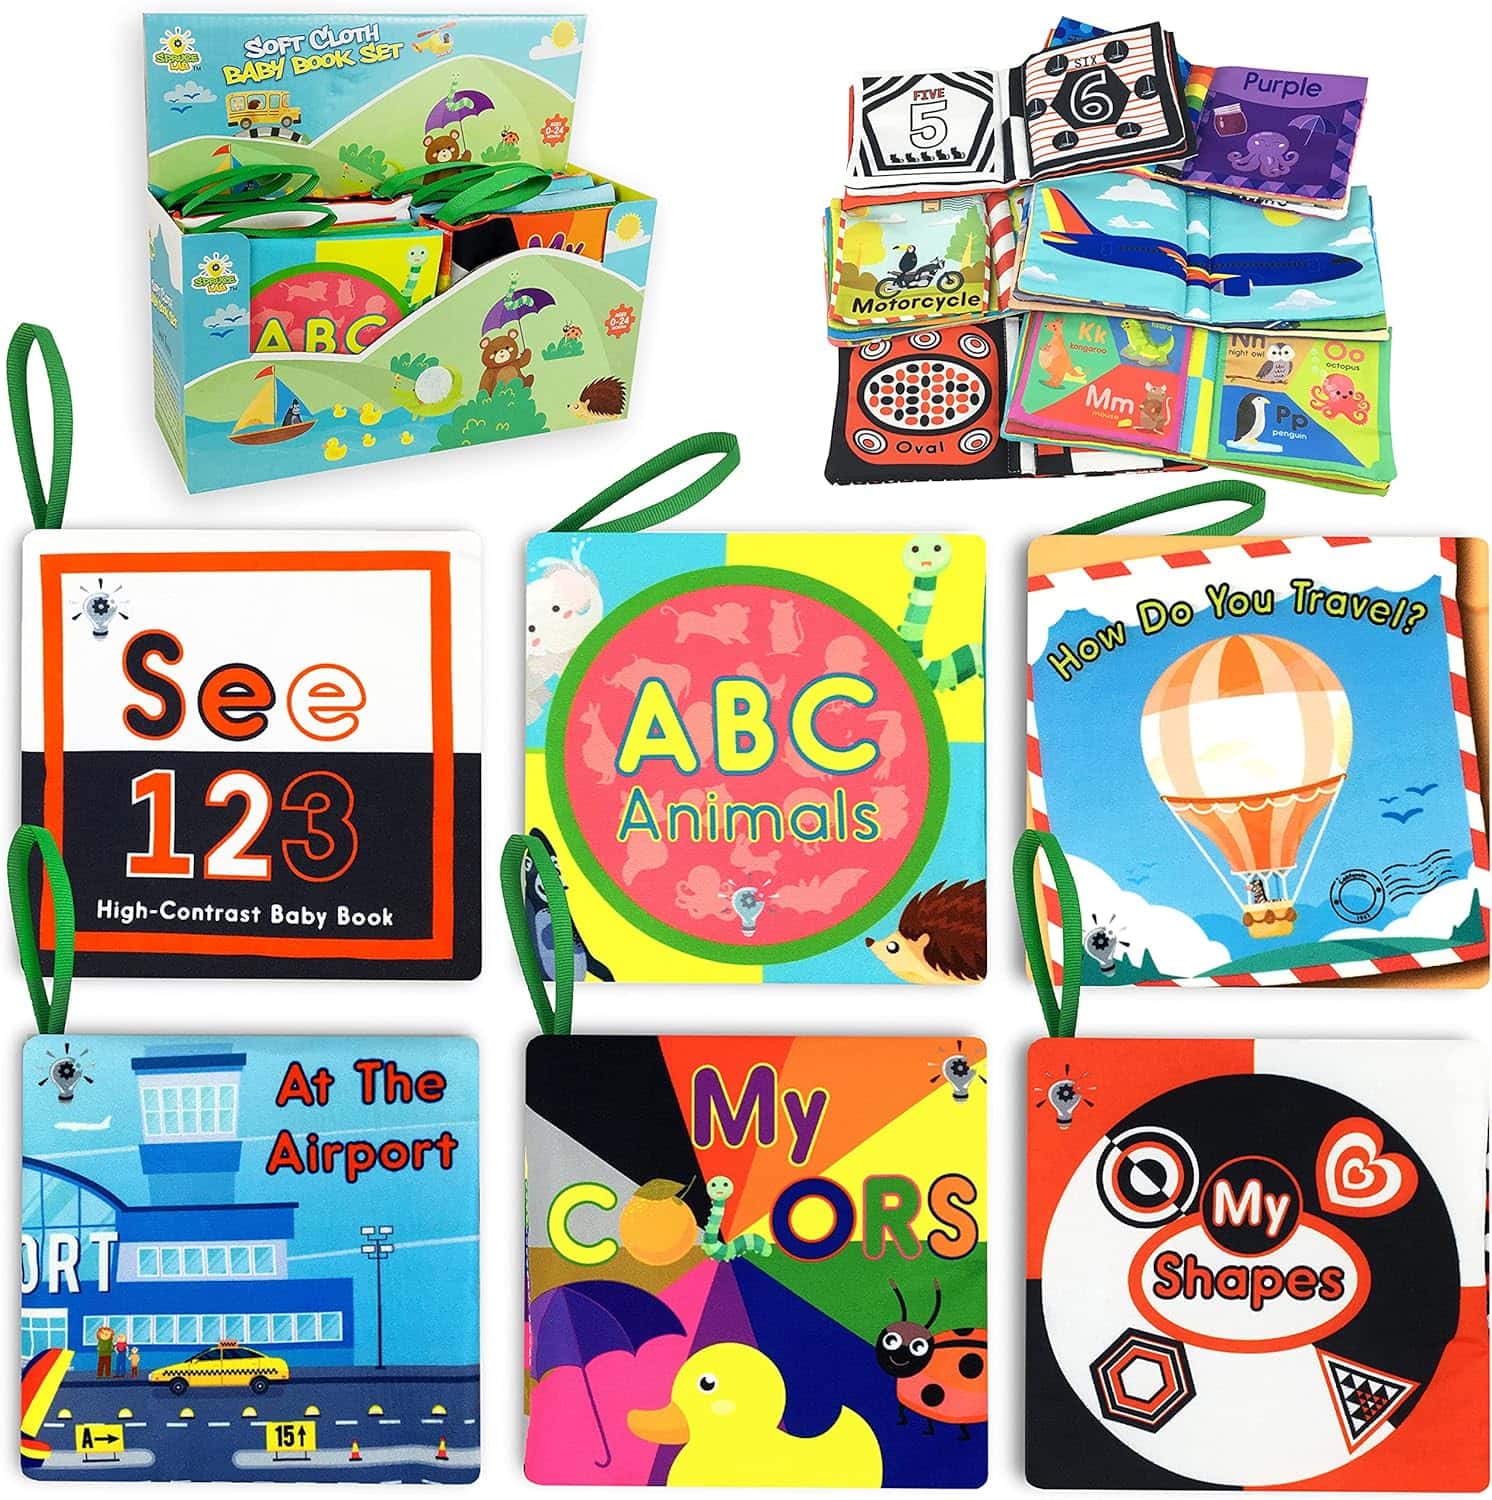 Spruce Lab Educational Soft Baby Books - 6 Cloth Book Set